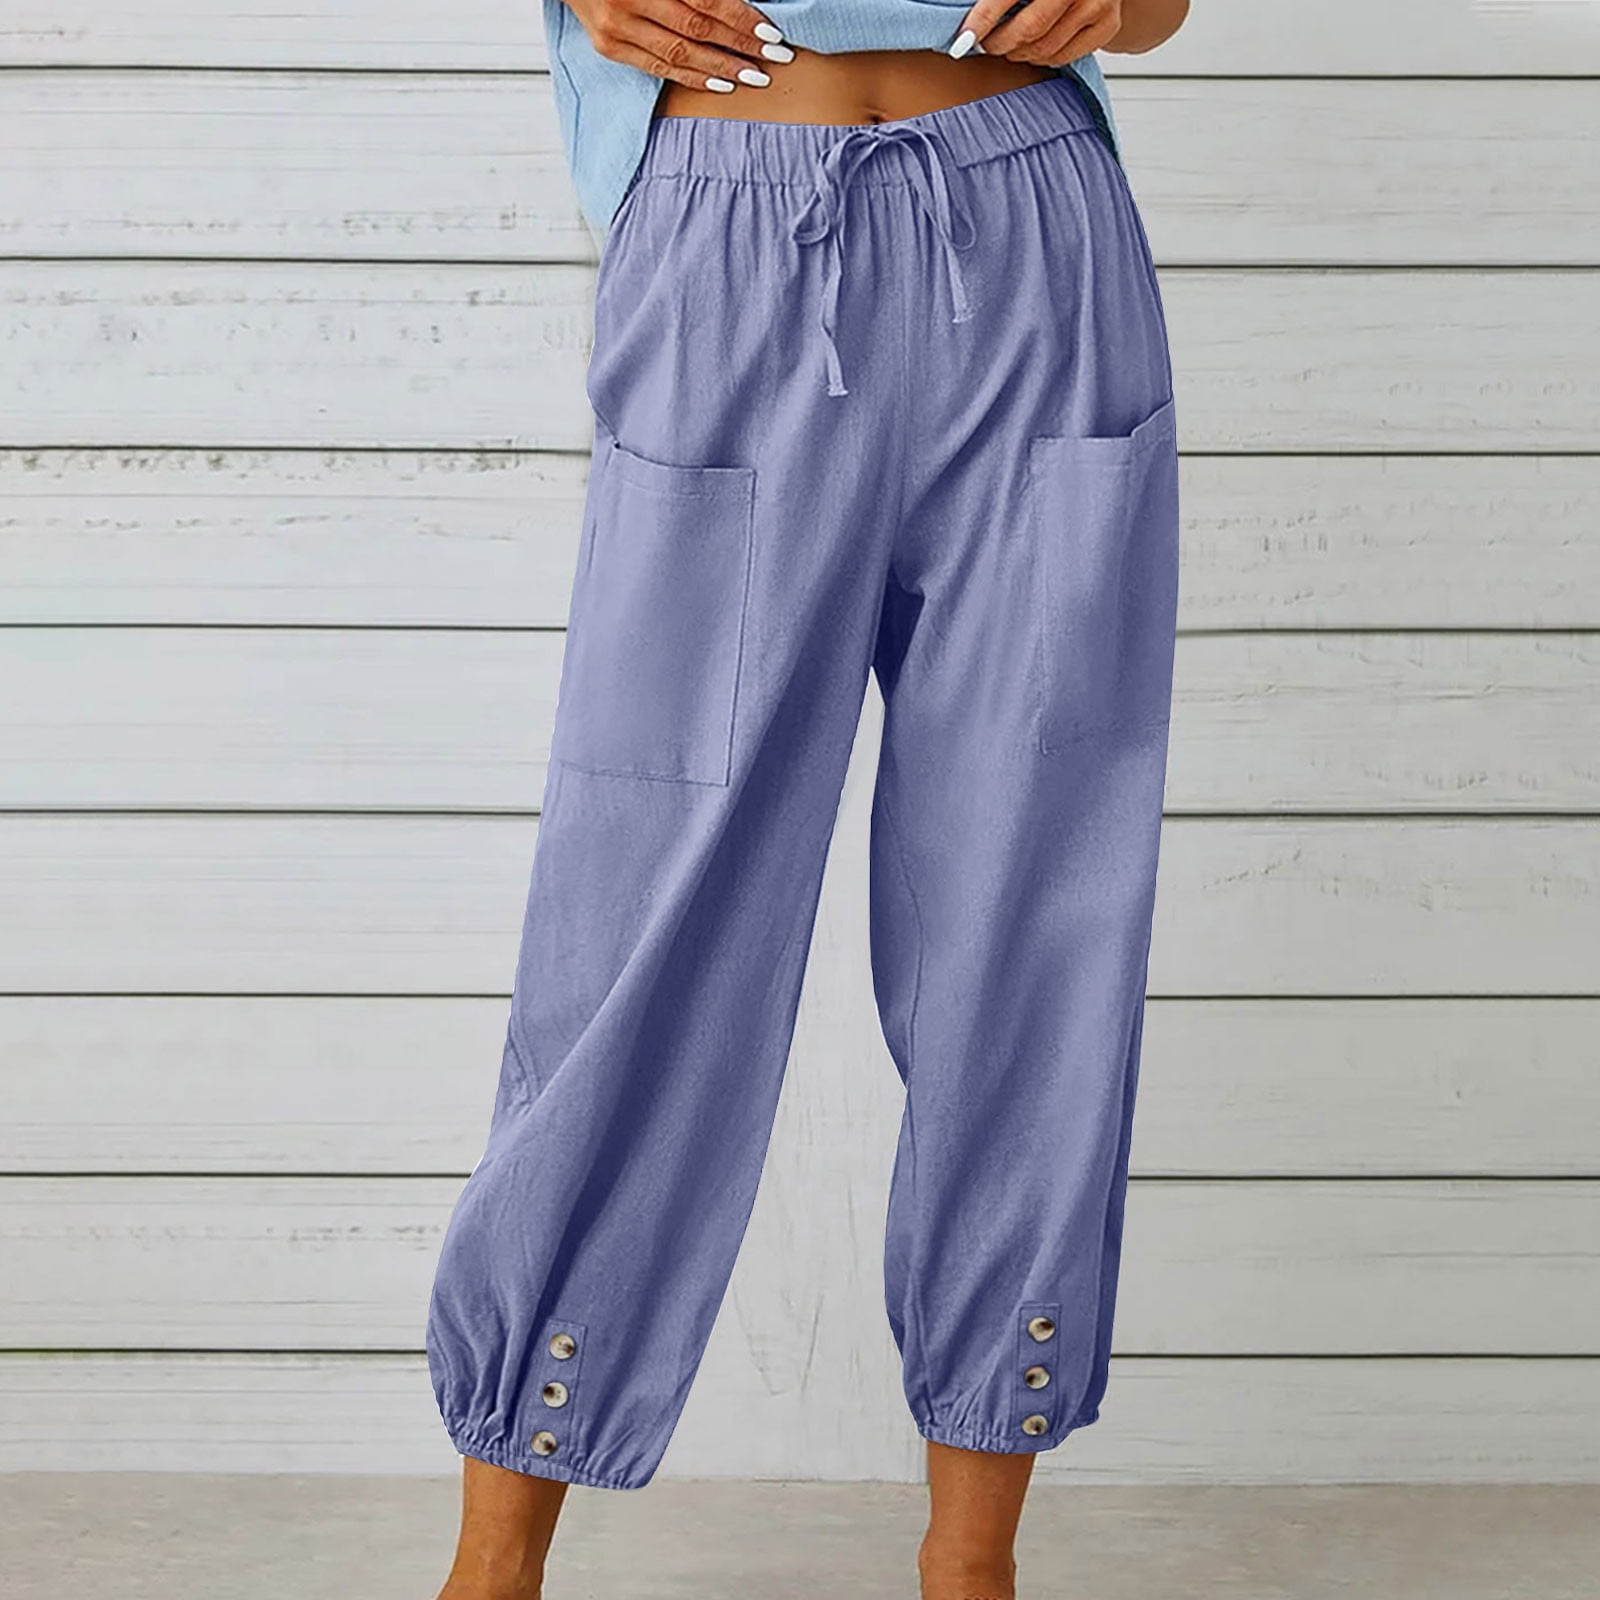 Formal Pants for Women Womens Flower Prinnted Linen Capri Pants Elastic  Waist Summer Cropped Trousers With Pockets Summer Women 